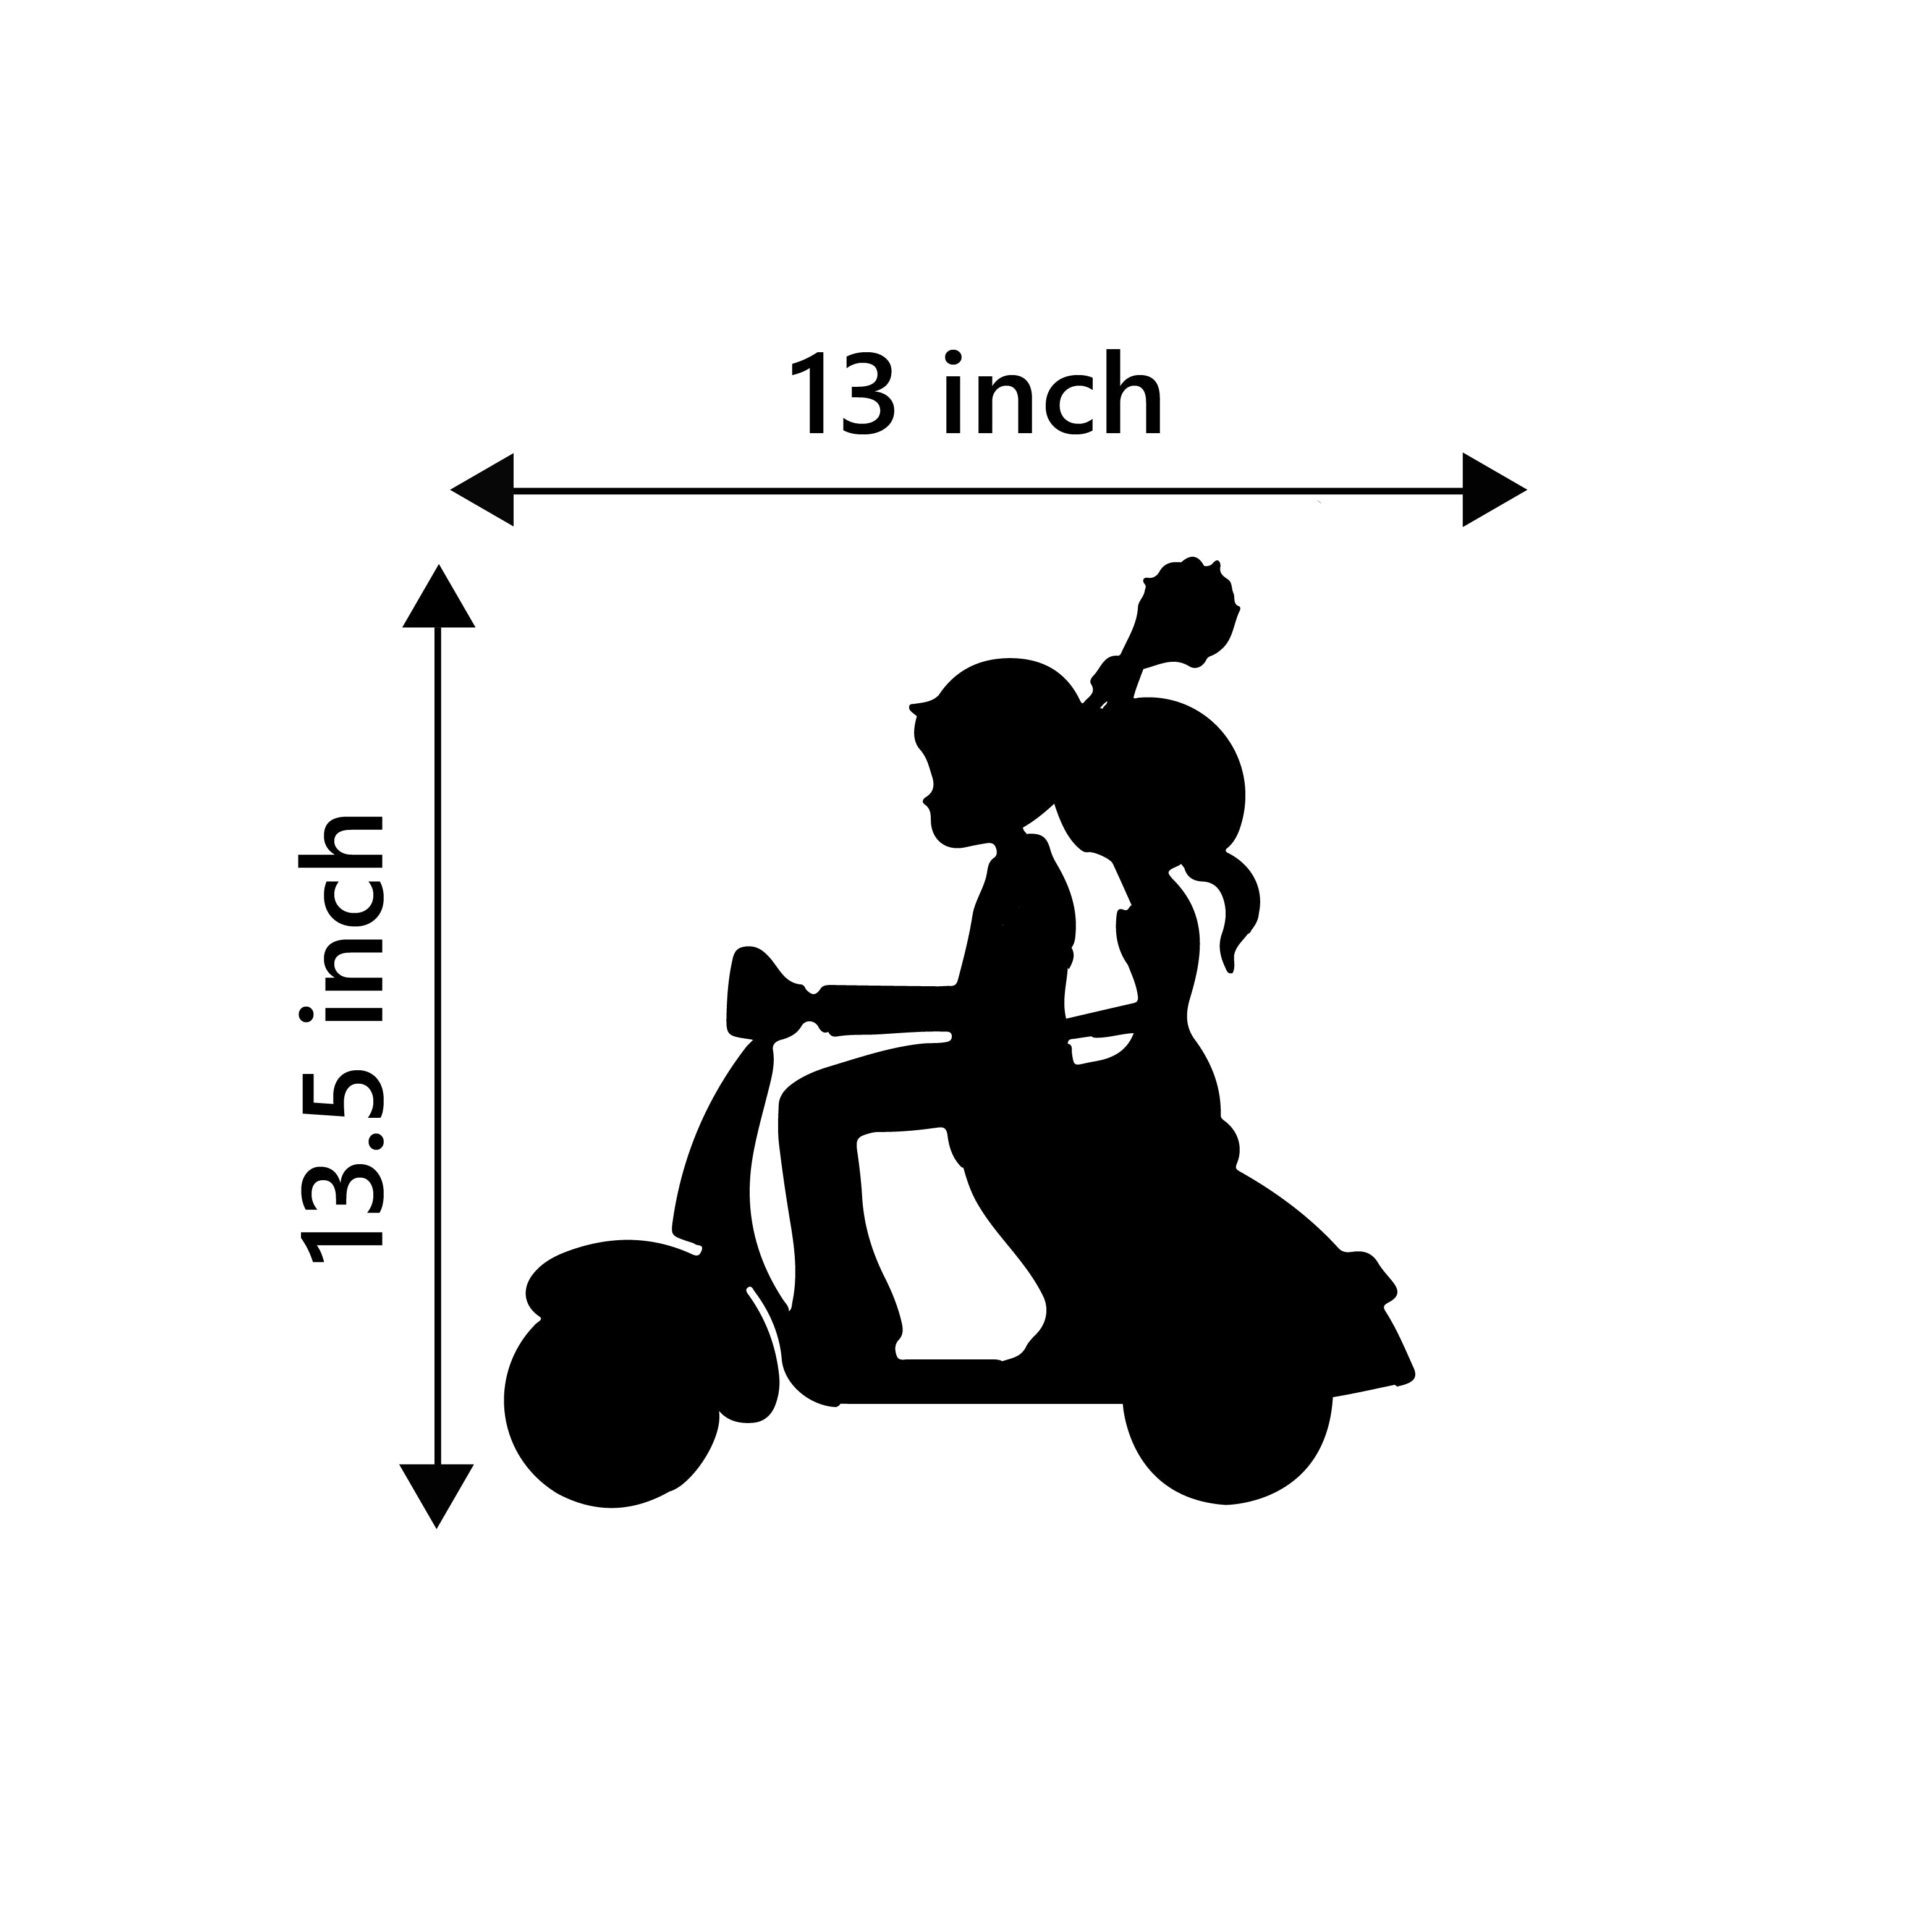 Couple On Scooter Black Engineered Wood Wall Art Cutout, Ready To Hang Home Decor 3